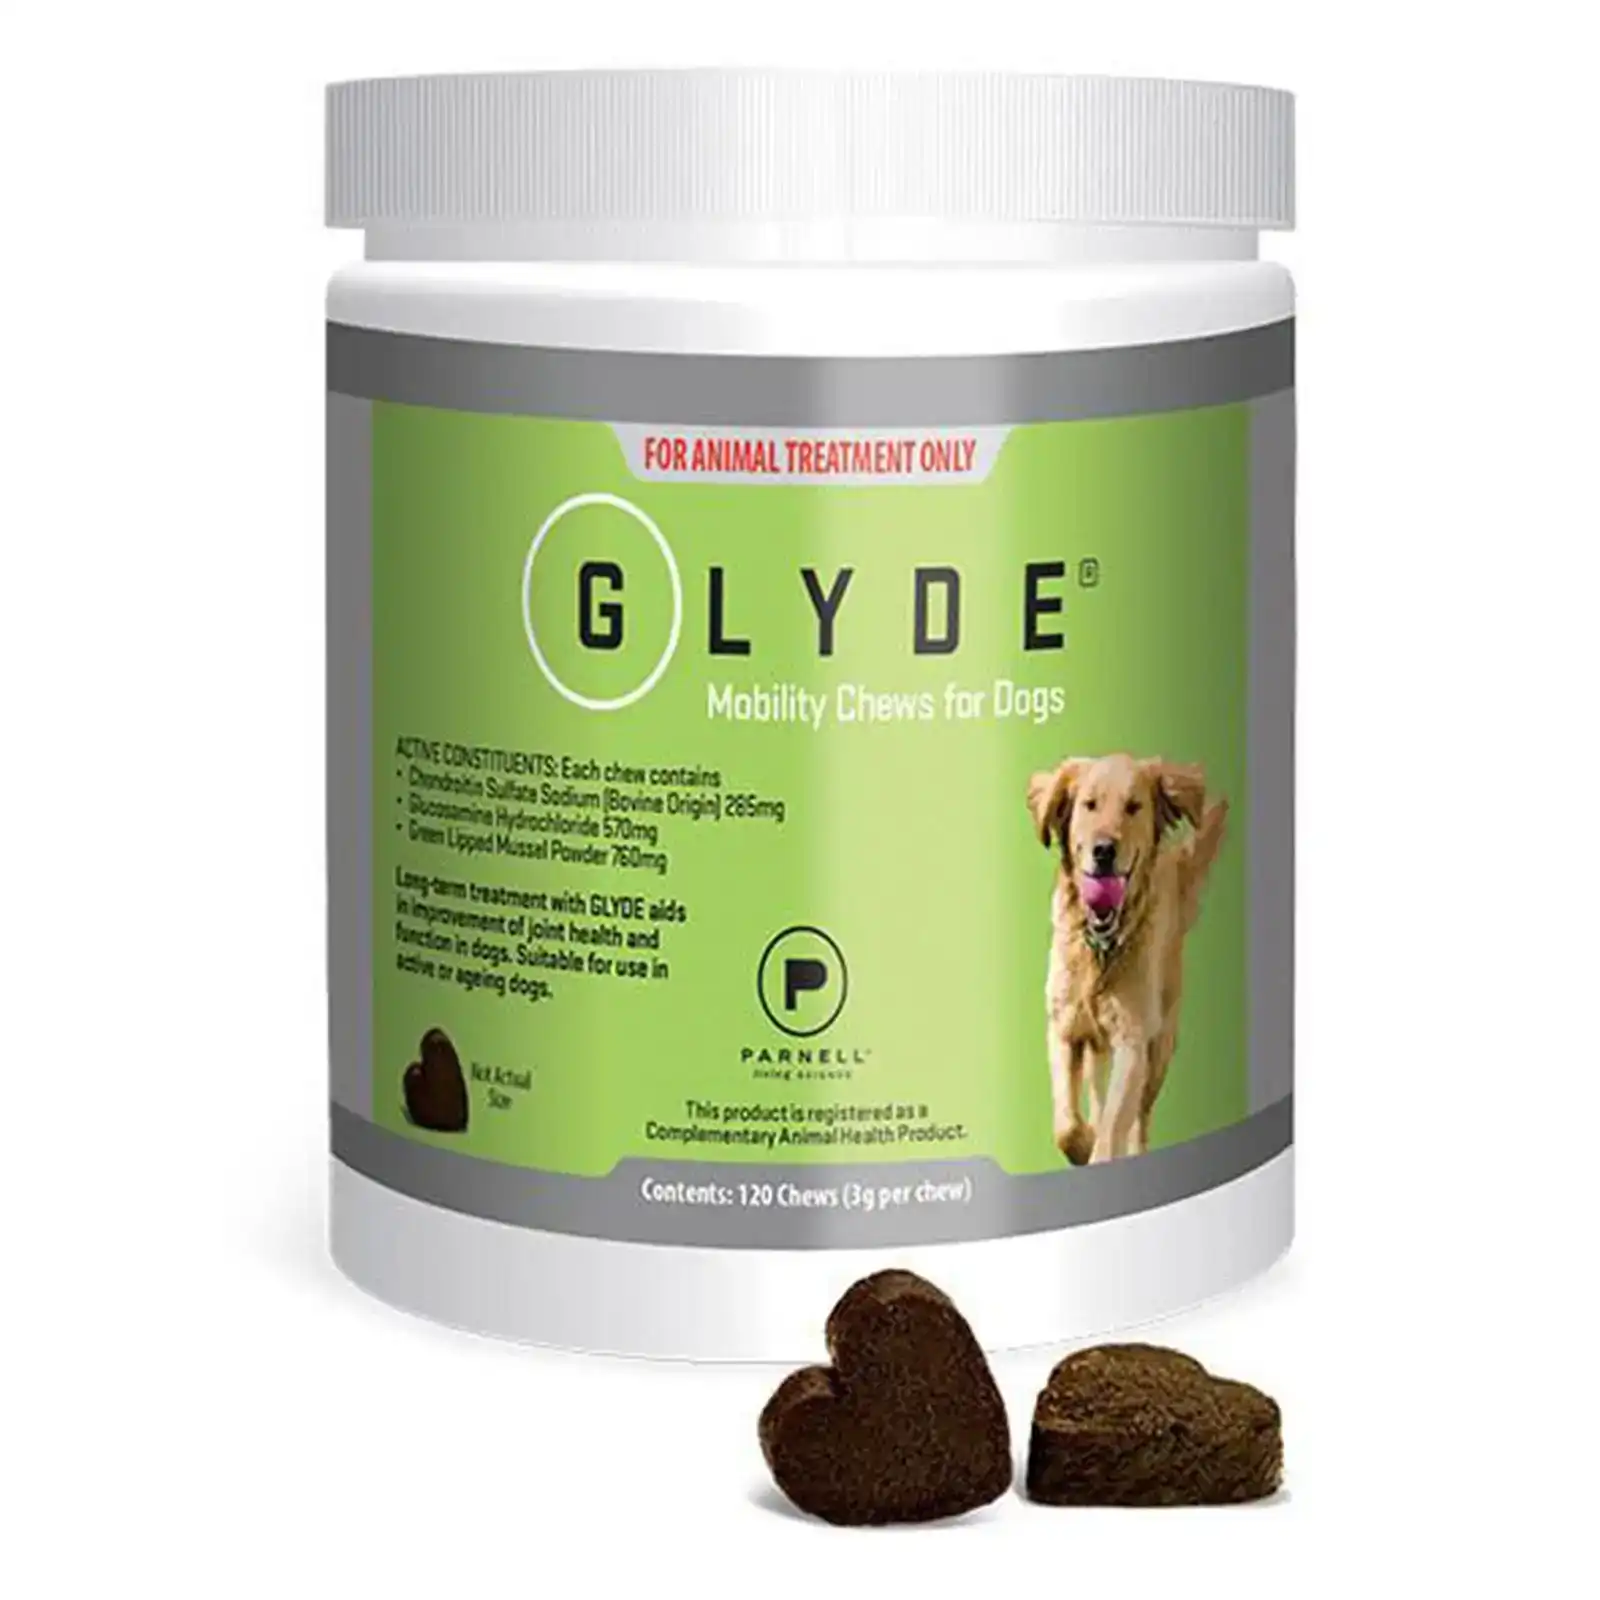 Glyde Mobility Chews For Dogs 240 Chews